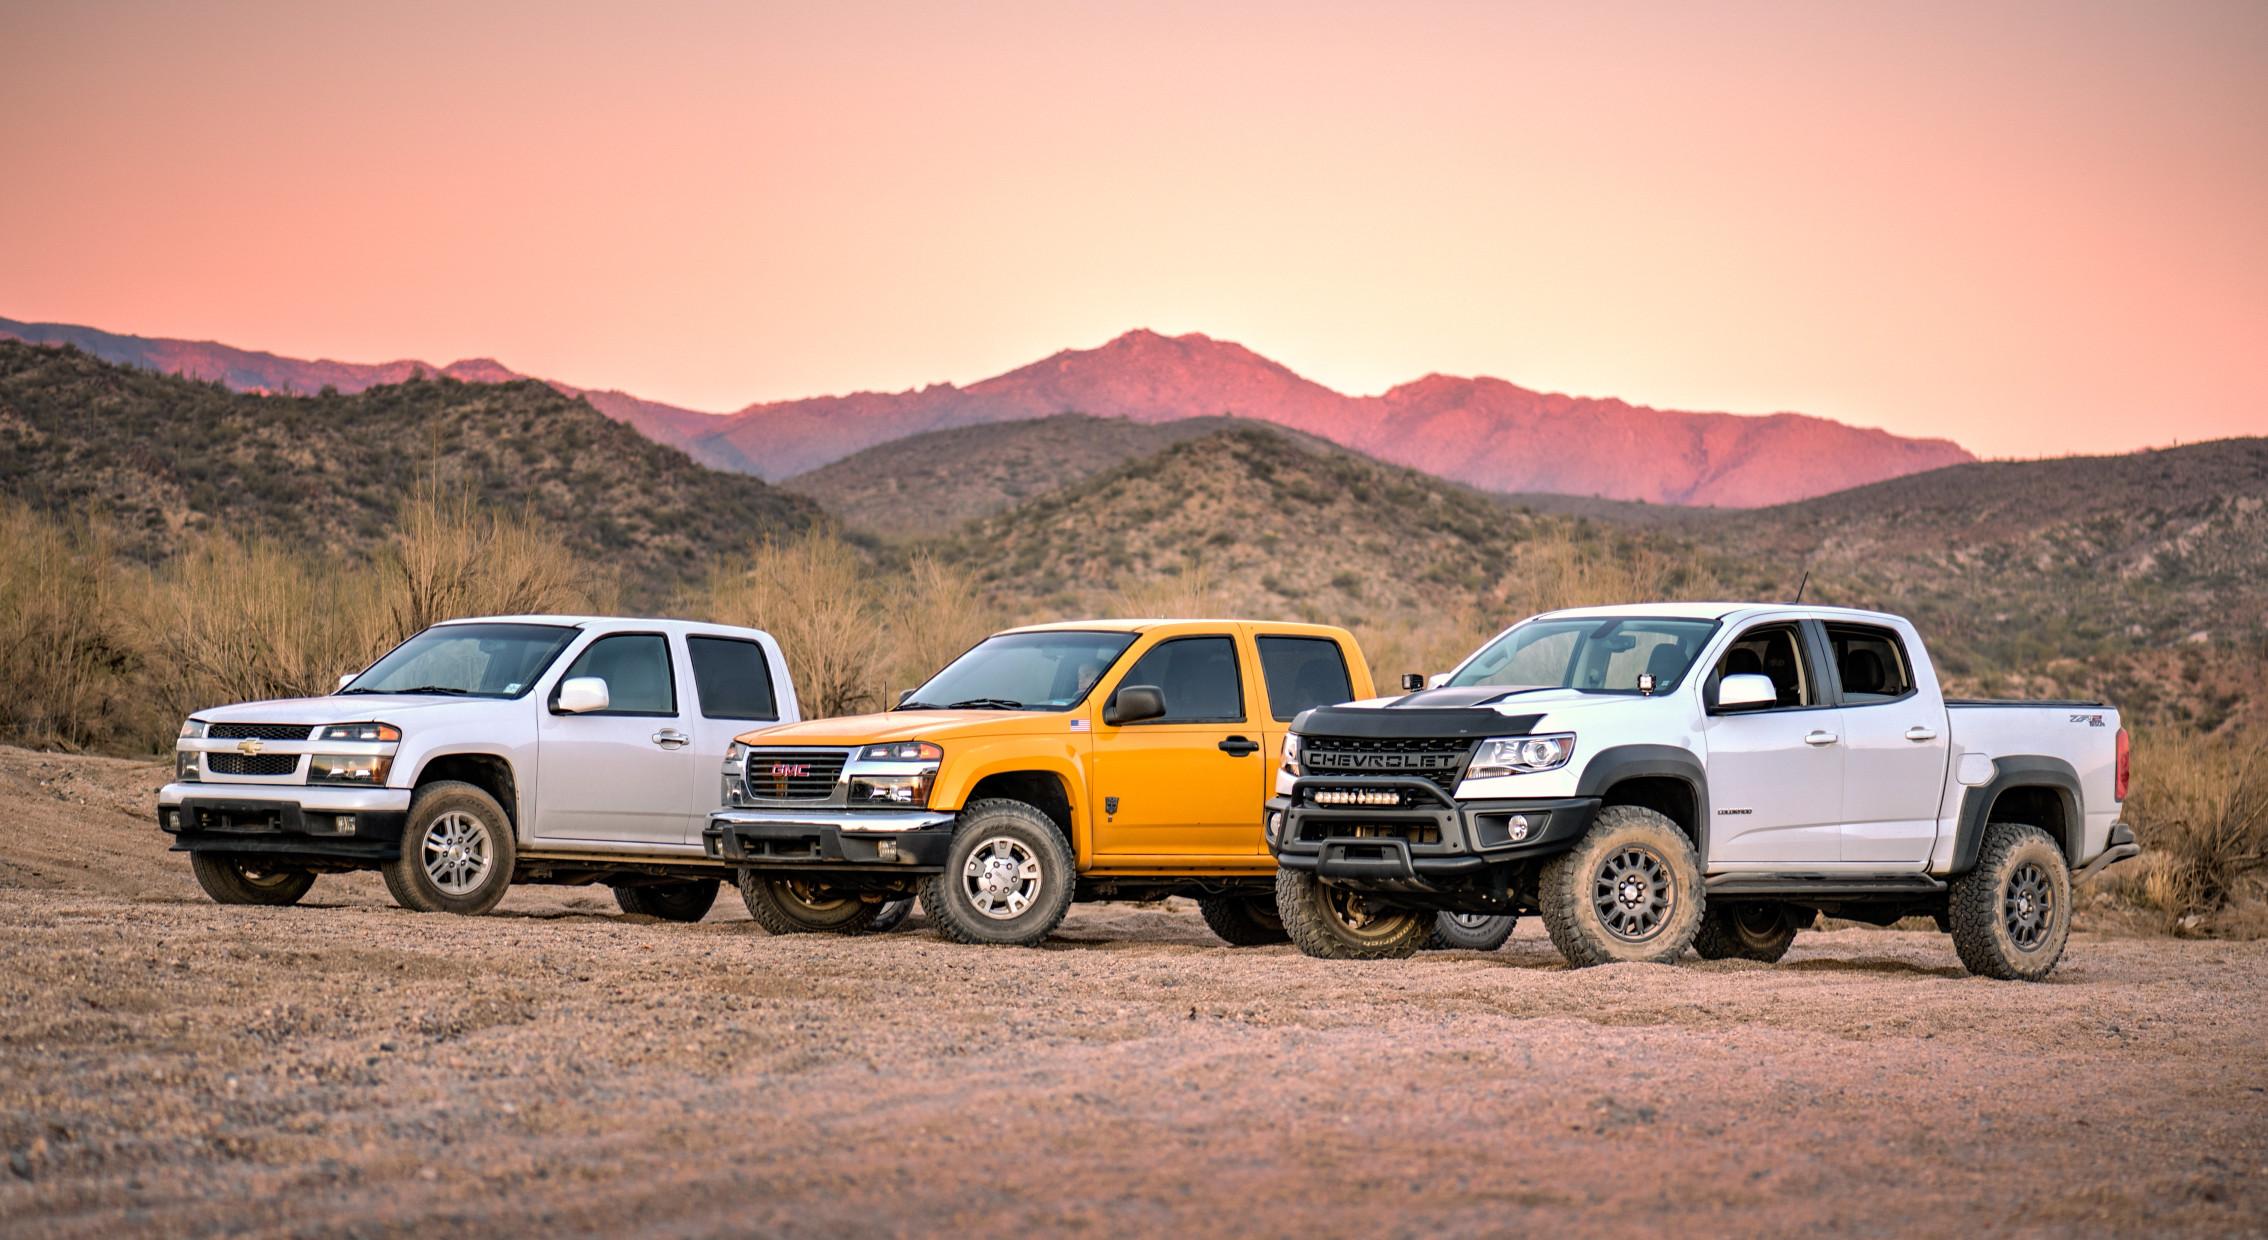 The Chevy Colorado has been named a fuel economy leader.